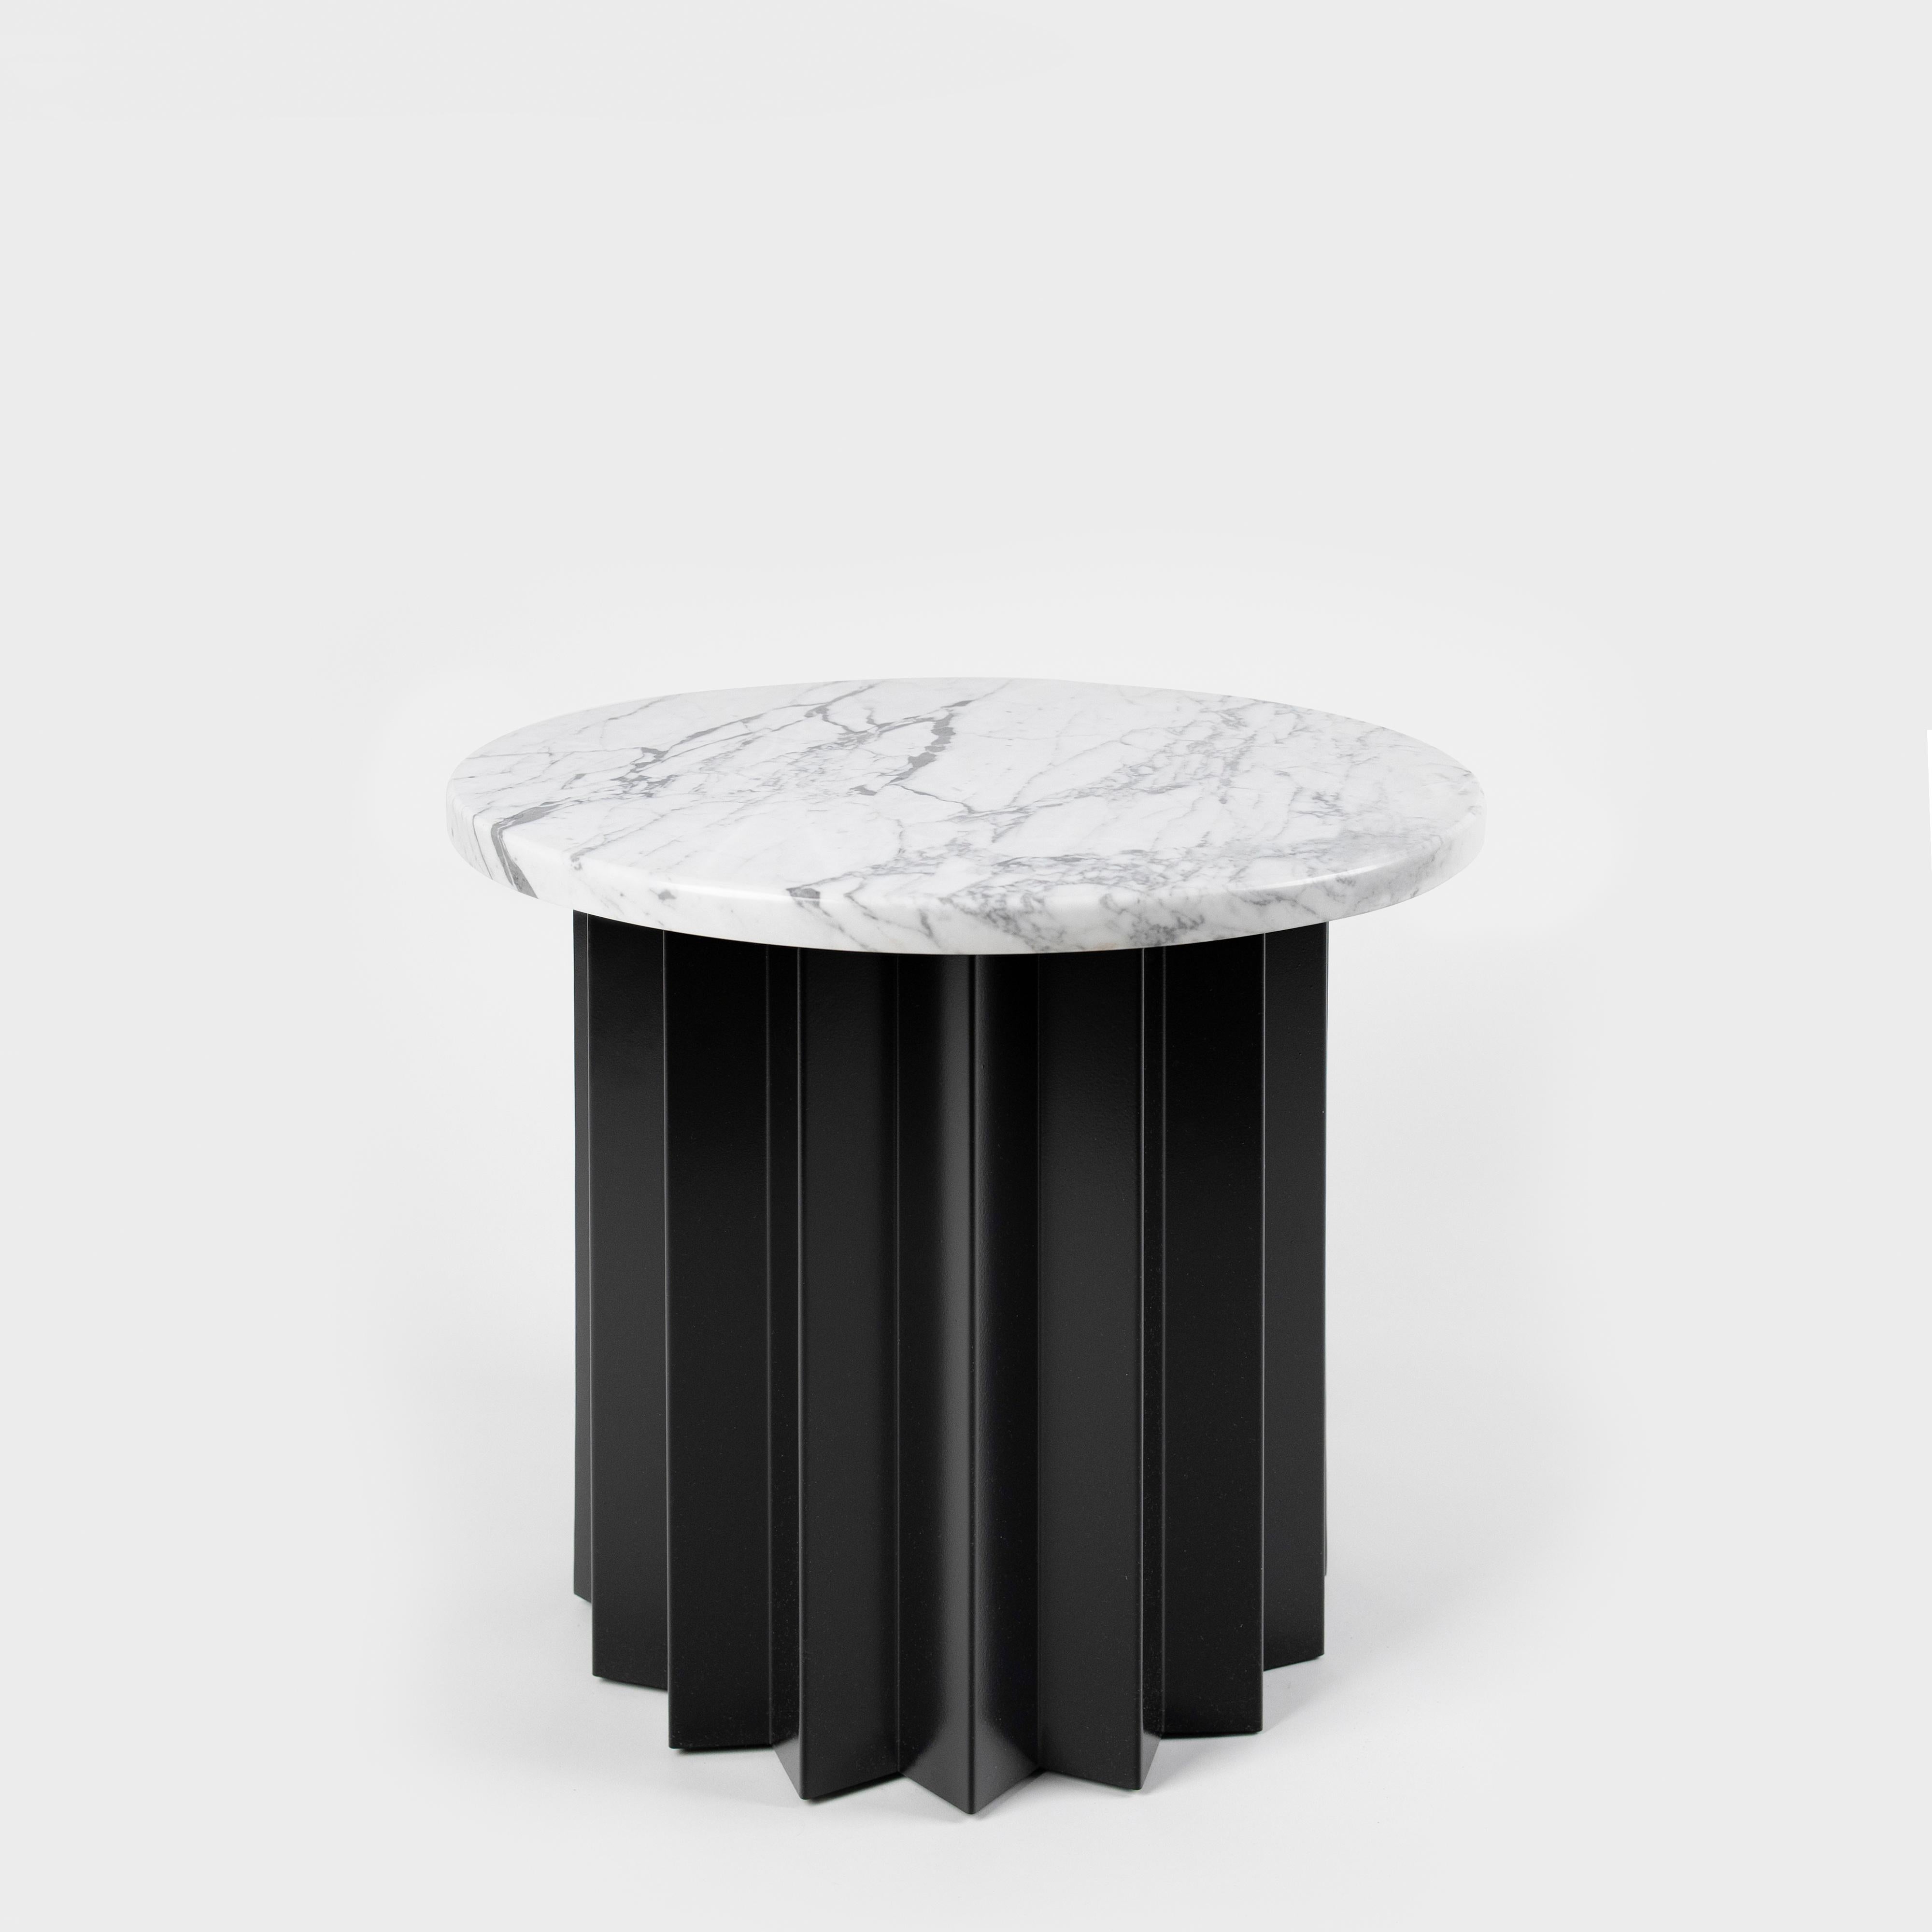 Volume is a collection of dining and side tables designed by DAY Studio in their unique simple and playful language. The powder coated metal base is completed with a table top selected from a distinguished choice of material and finish